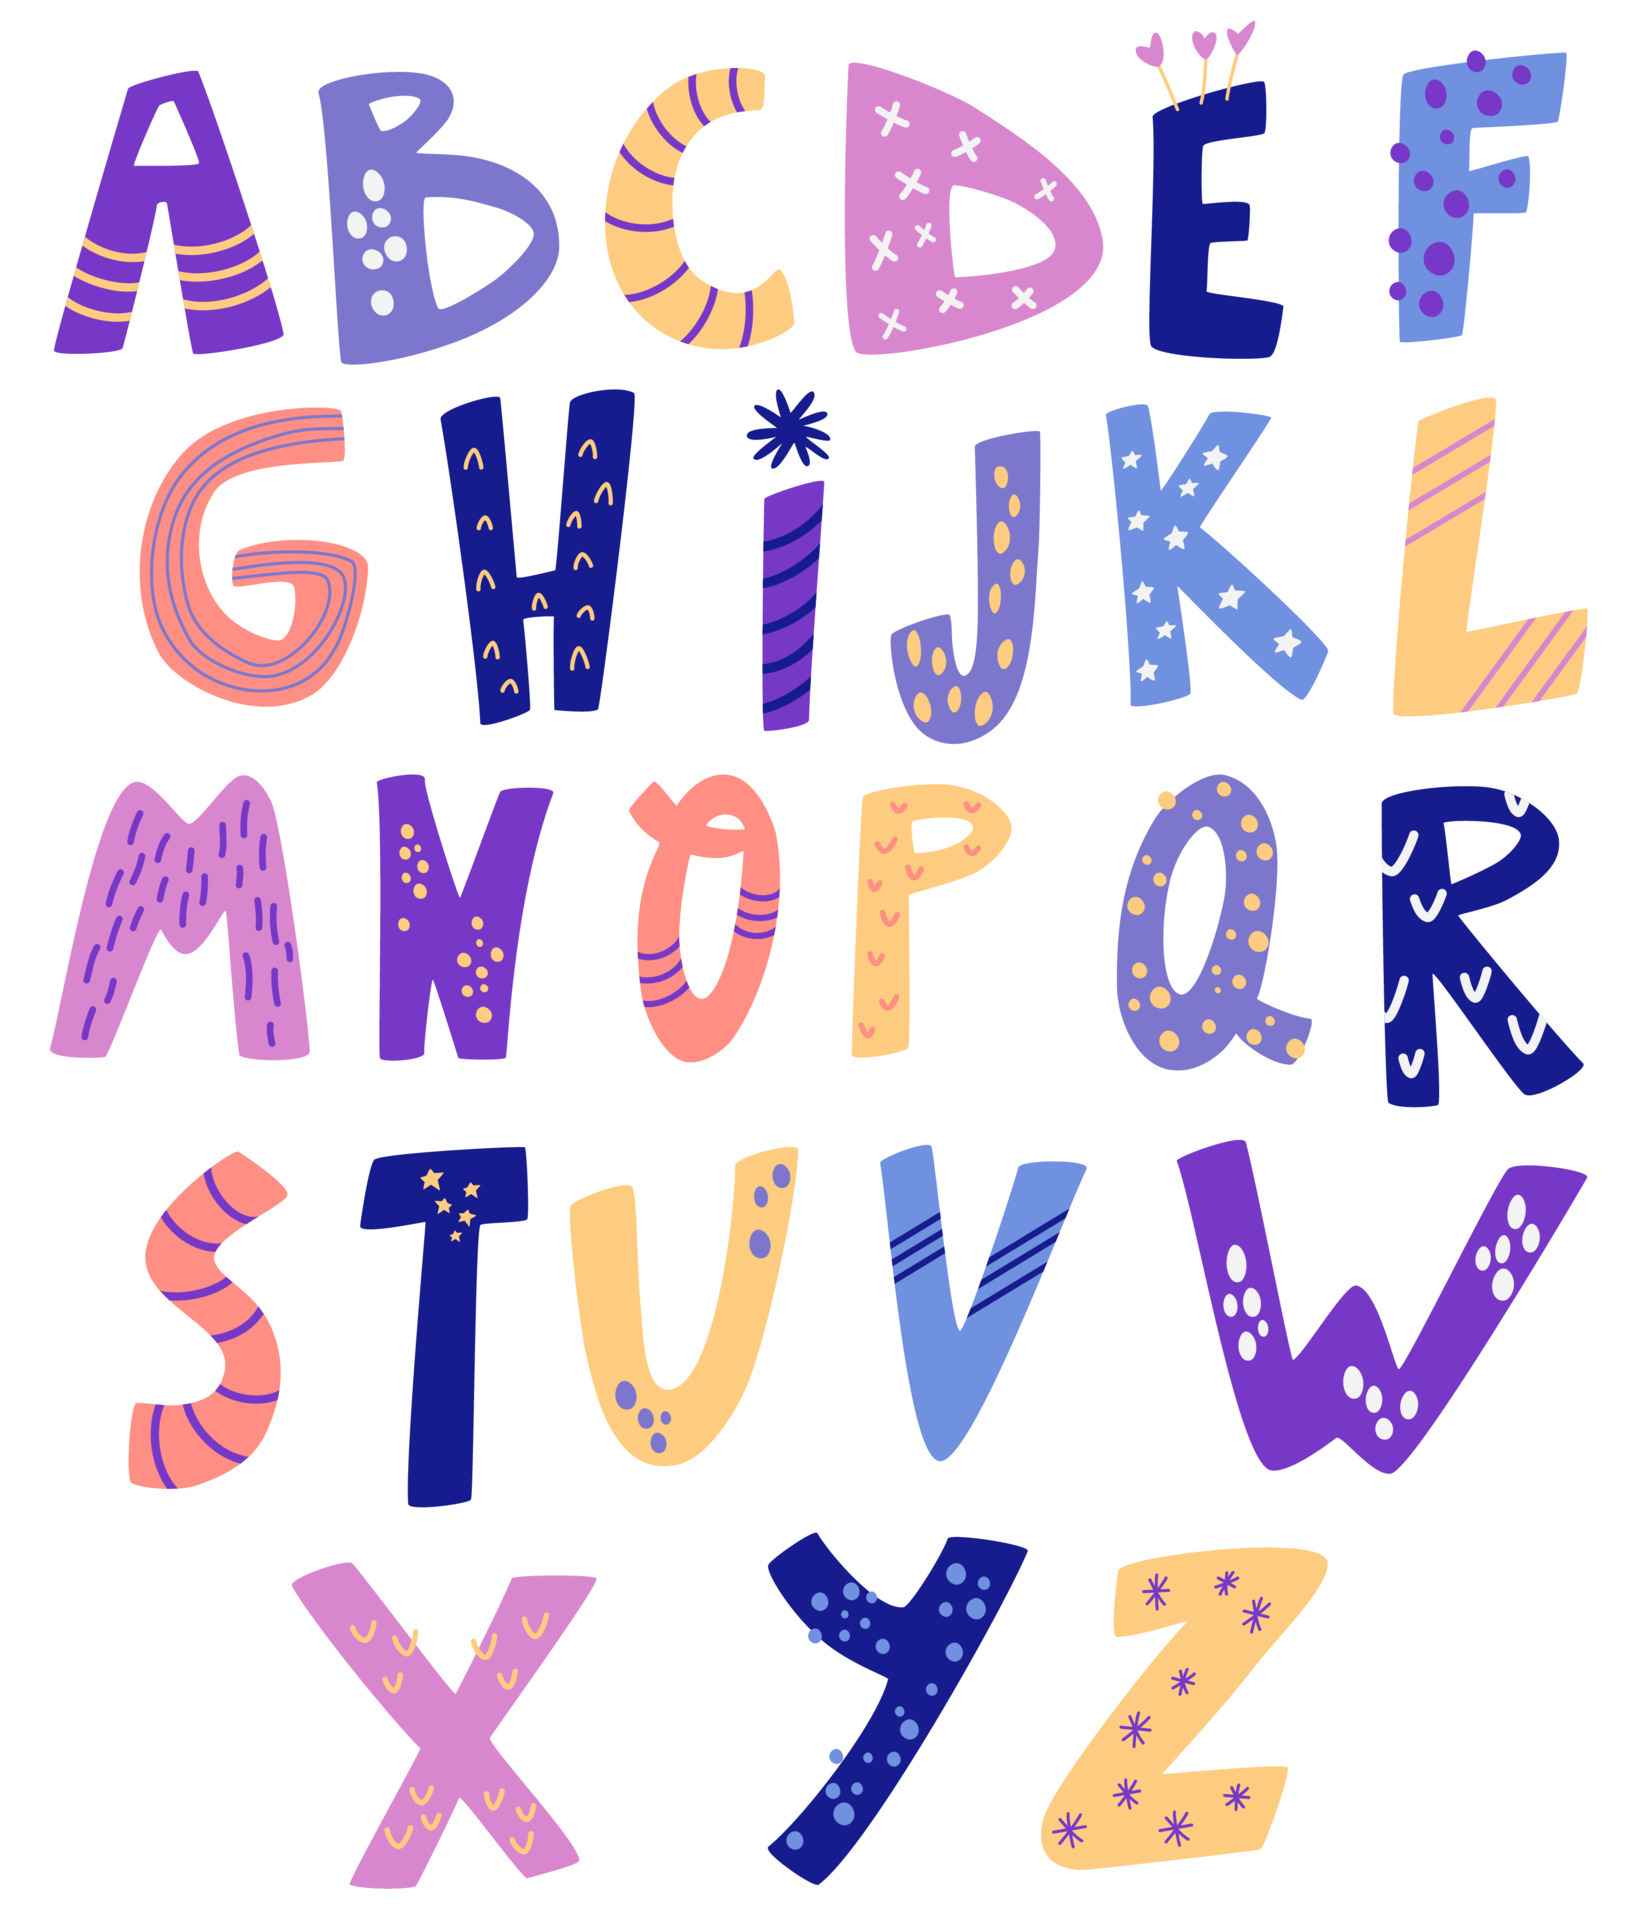 Poster Letters of the English alphabet 